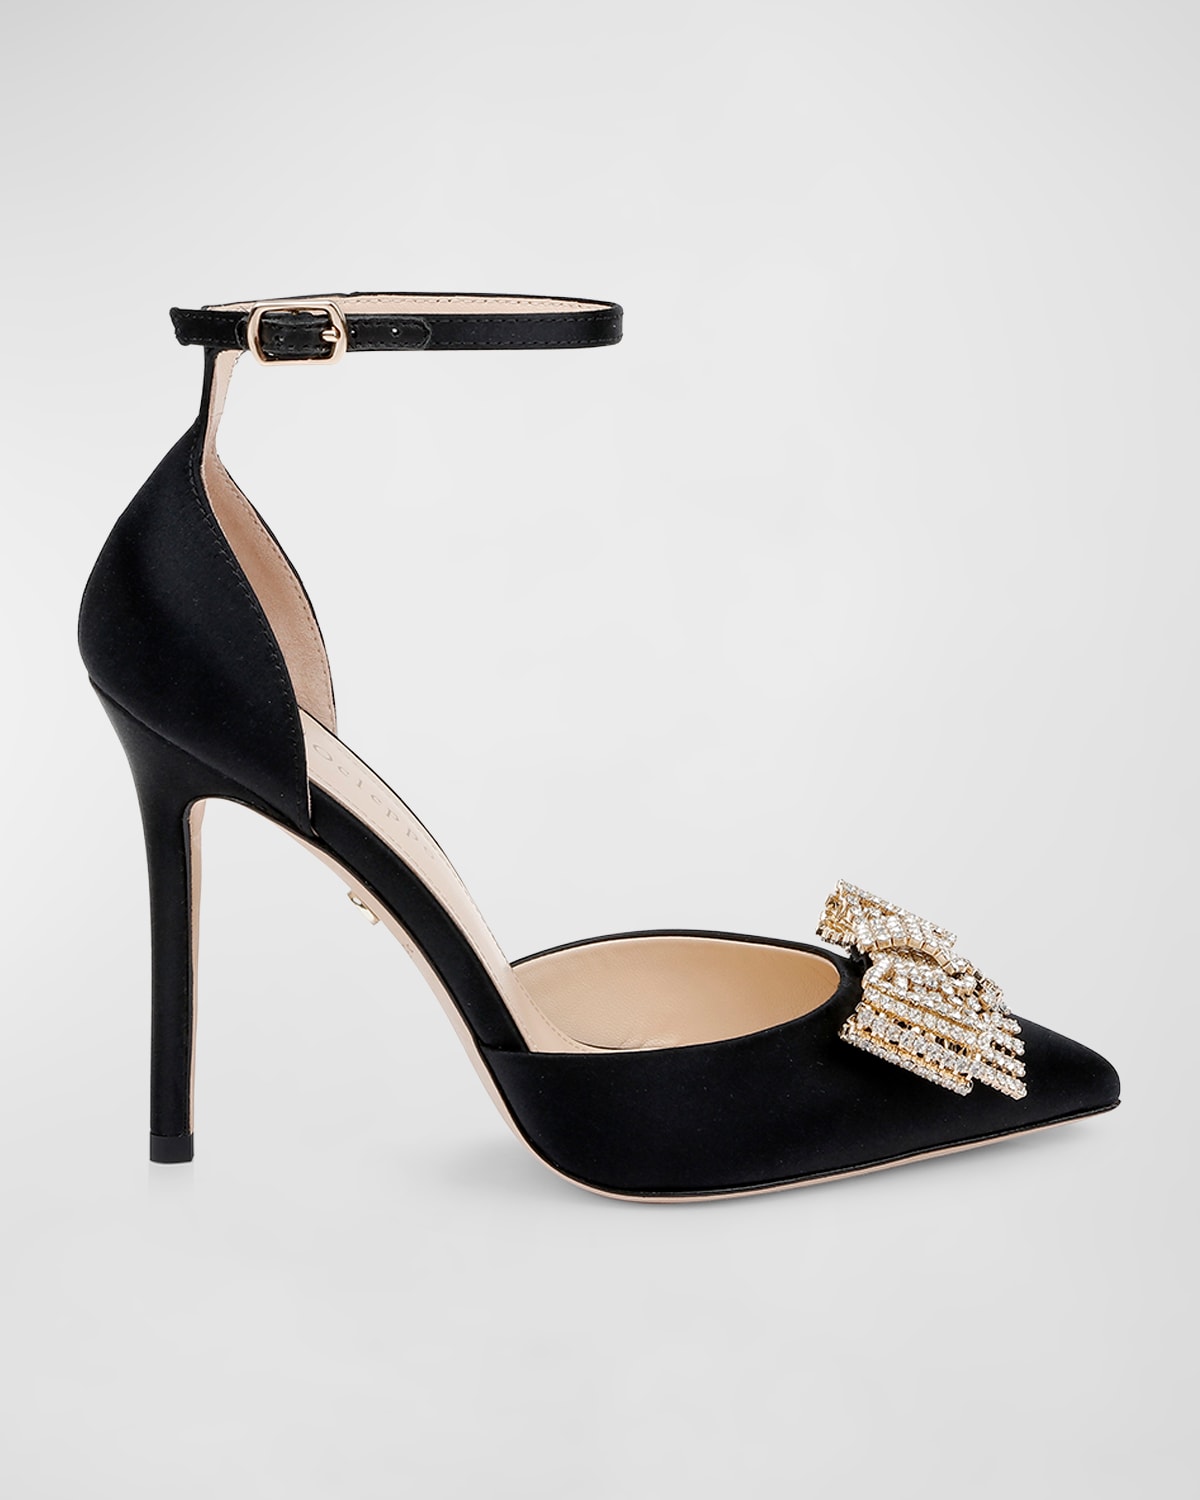 DEE OCLEPPO PLUSH CRYSTAL BOW ANKLE-STRAP PUMPS